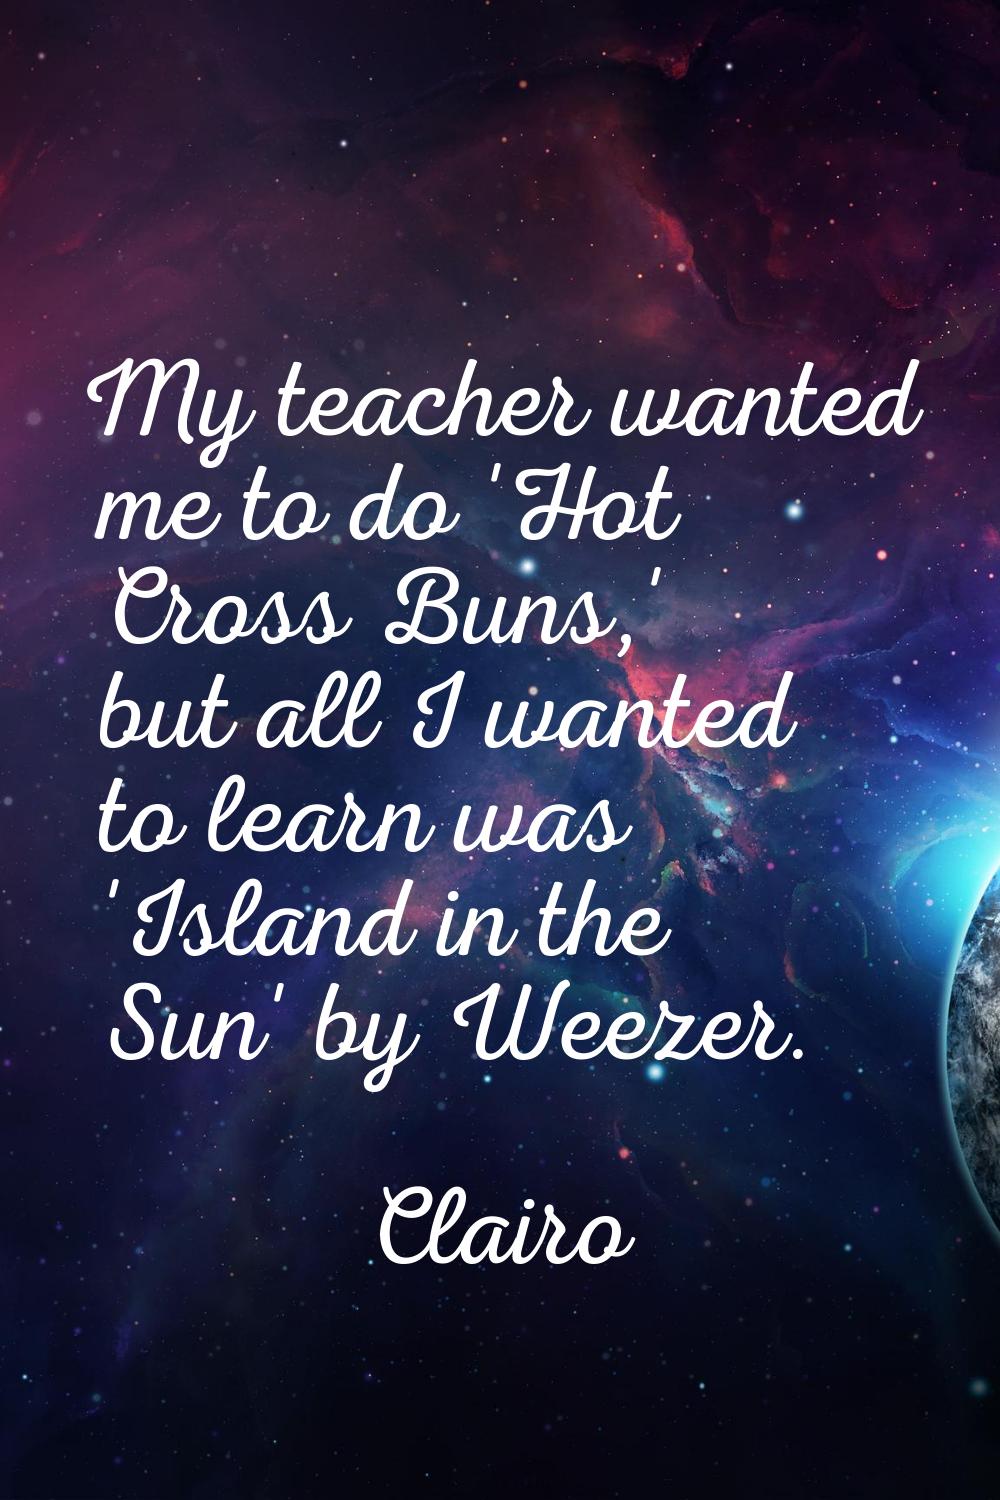 My teacher wanted me to do 'Hot Cross Buns,' but all I wanted to learn was 'Island in the Sun' by W